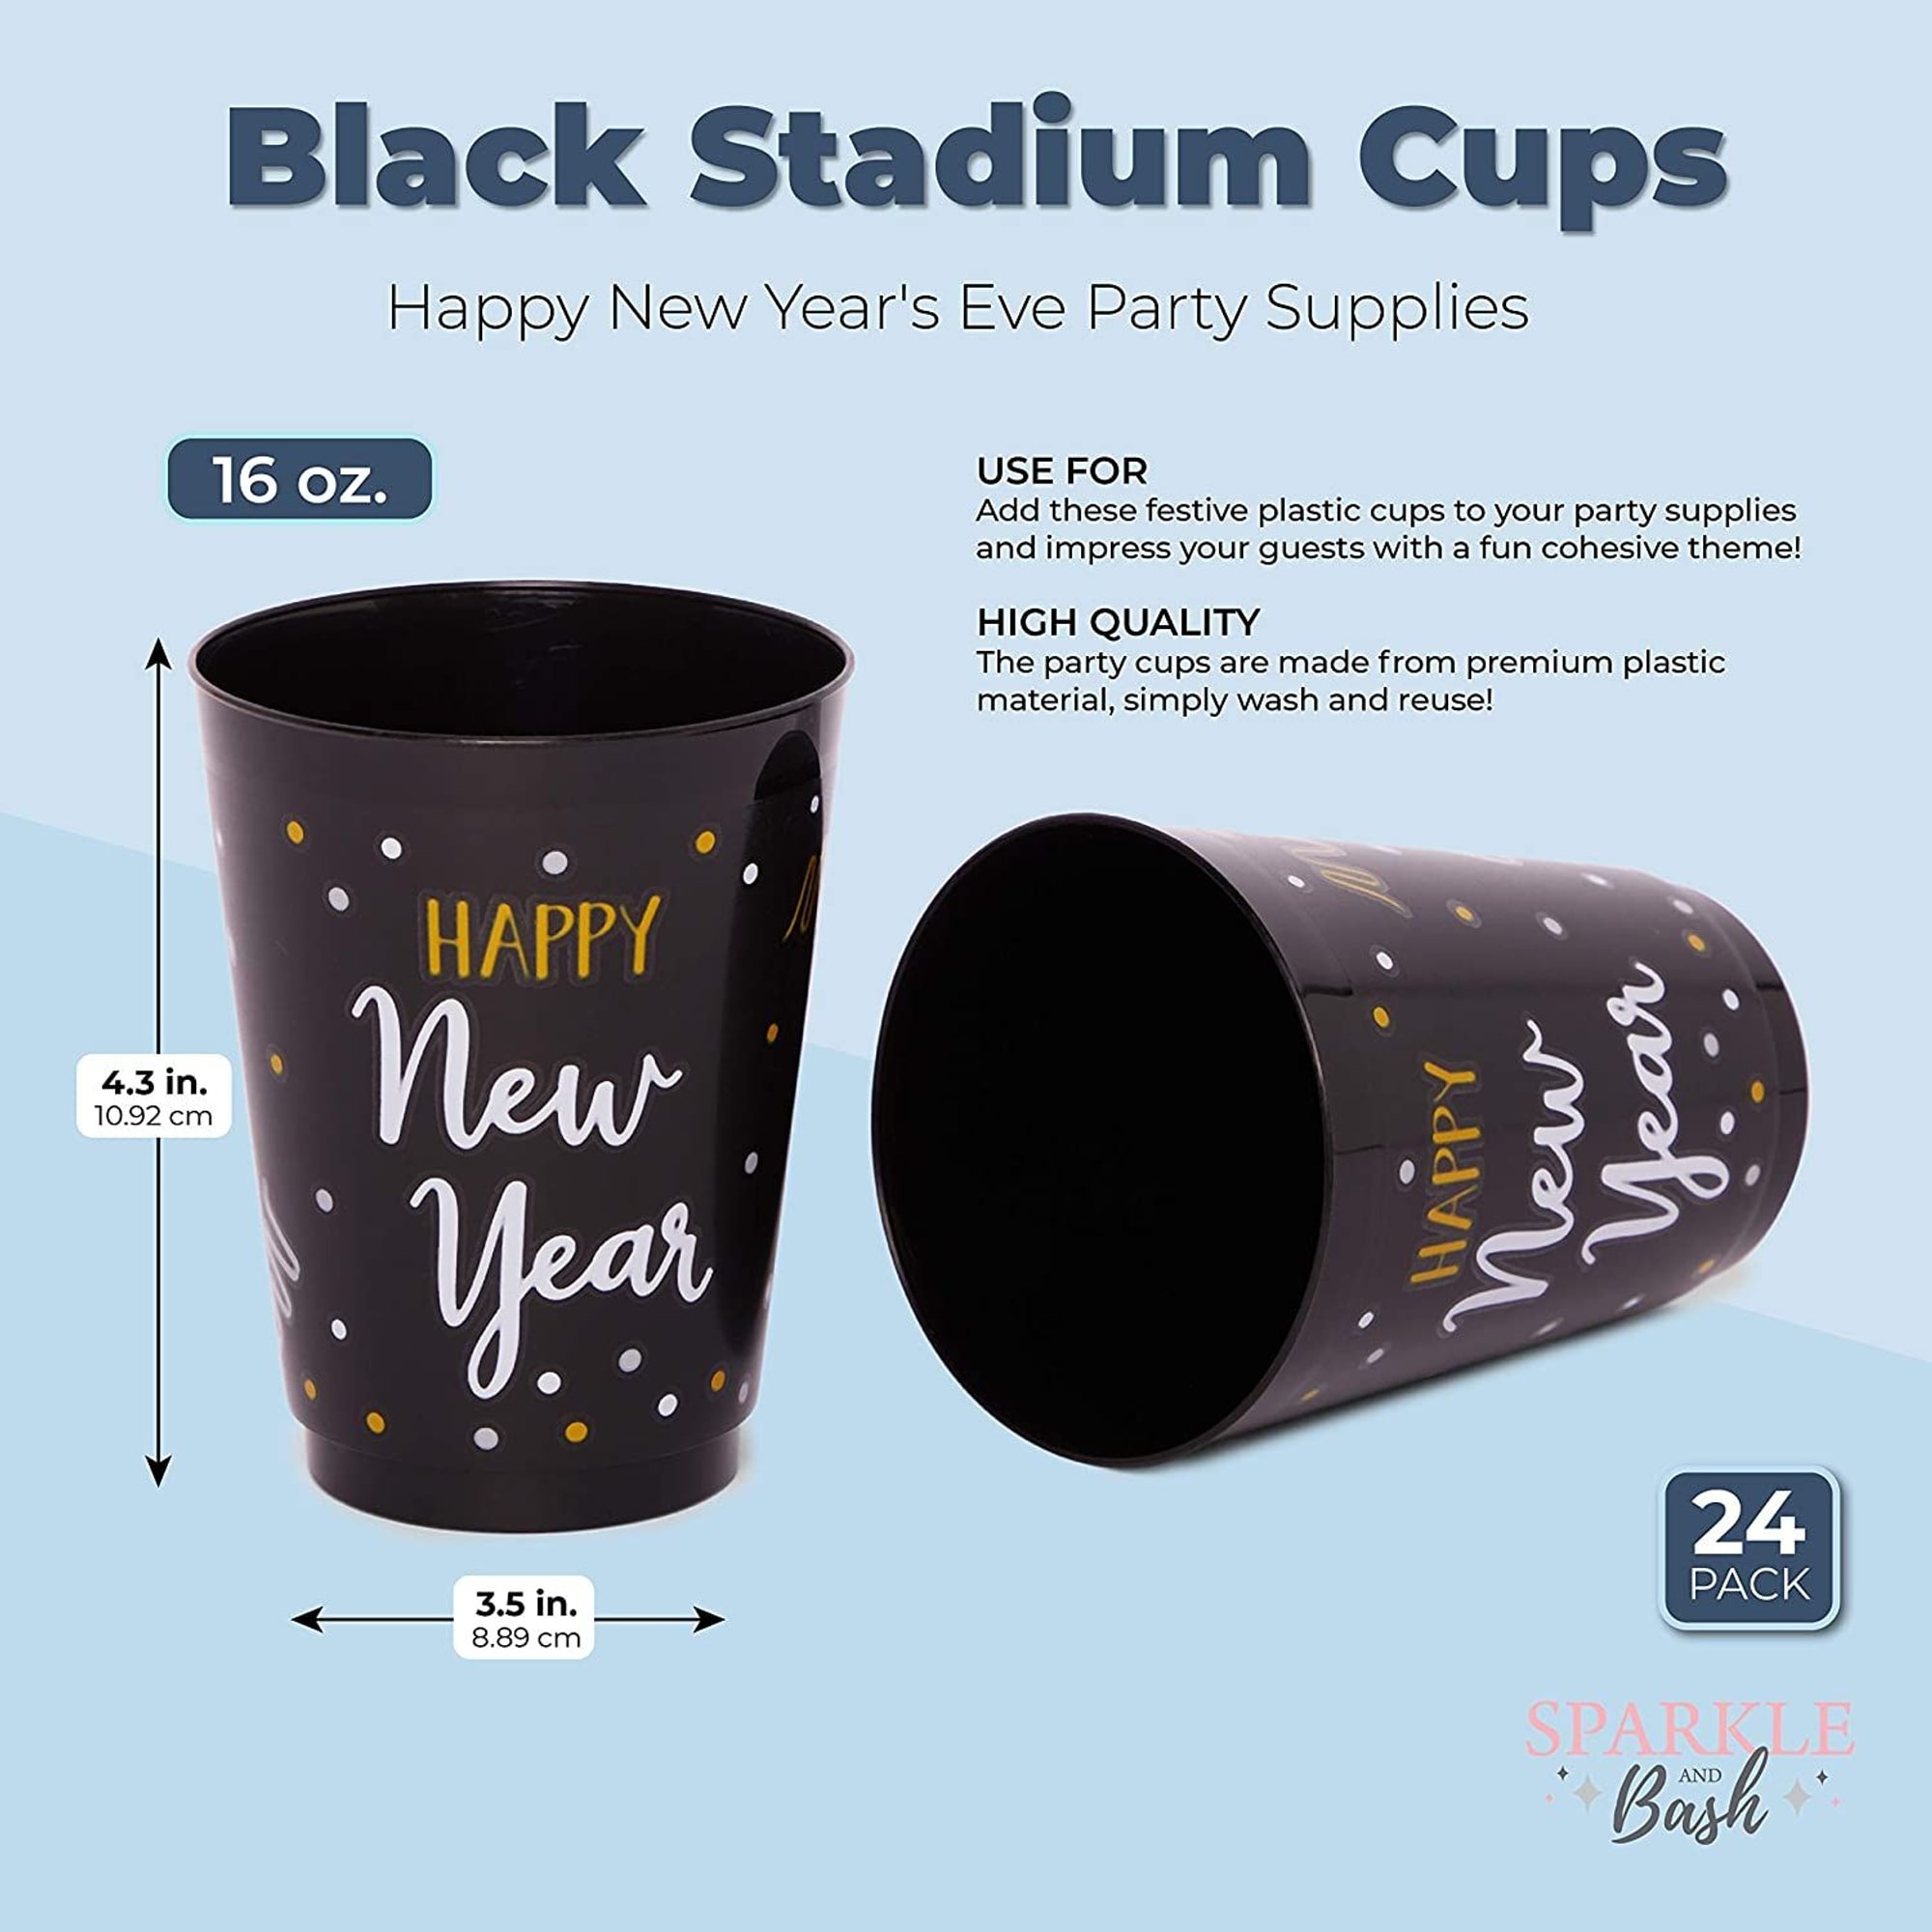 https://ak1.ostkcdn.com/images/products/is/images/direct/6ed9cdfded7d21d377f1768d670a178d1540038c/Happy-New-Year-Party-Cups%2C-Reusable-Plastic-NYE-Party-Supplies-%28Black%2C-16-oz%2C-24-Pack%29.jpg